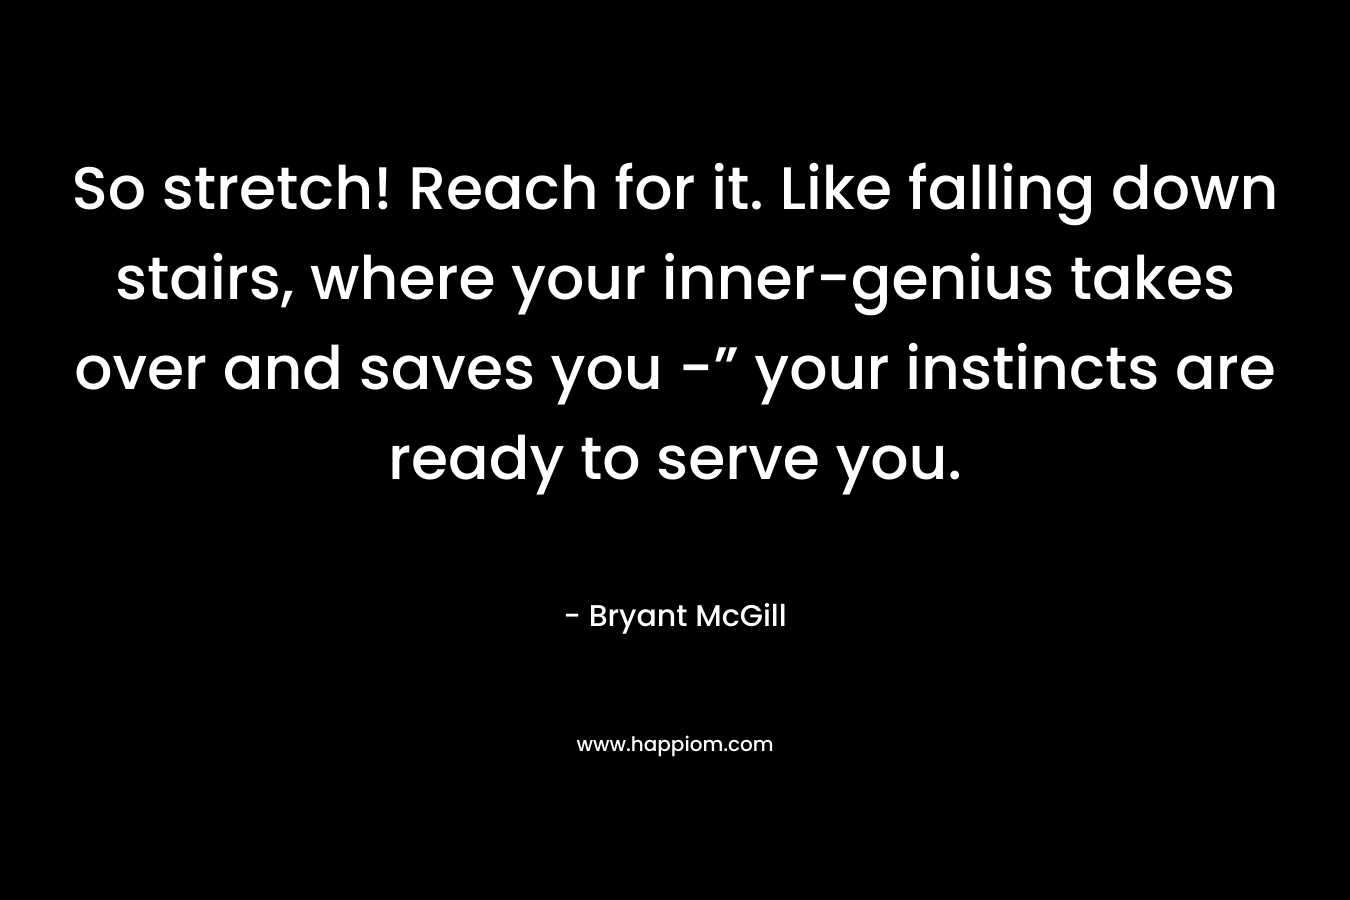 So stretch! Reach for it. Like falling down stairs, where your inner-genius takes over and saves you -” your instincts are ready to serve you. – Bryant McGill